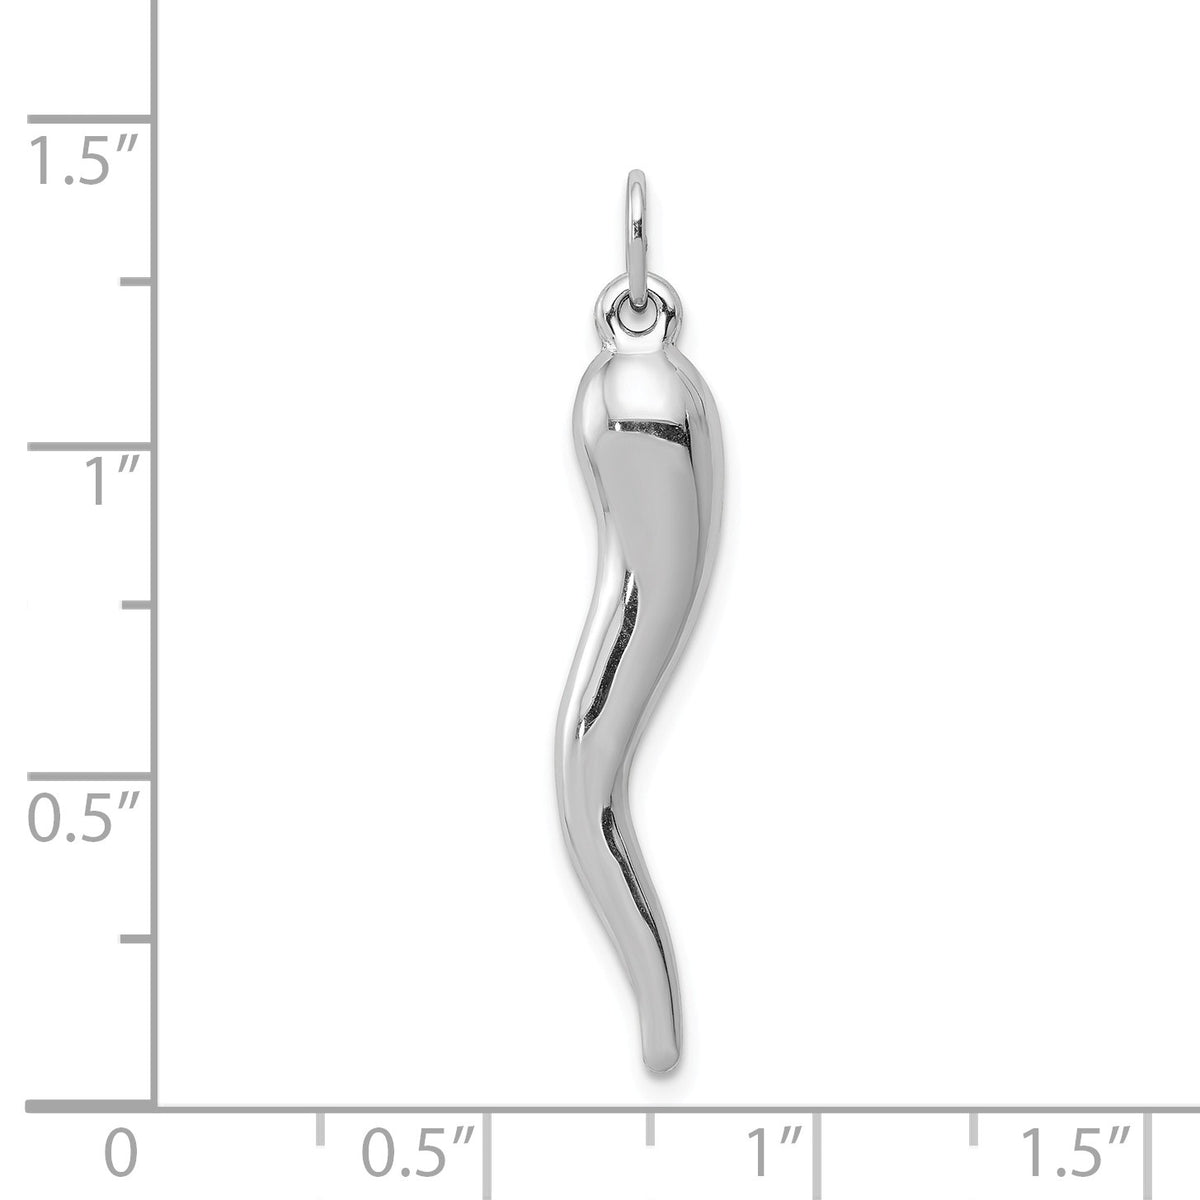 Alternate view of the 14k White Gold Italian Horn Pendant, 5 x 33mm by The Black Bow Jewelry Co.